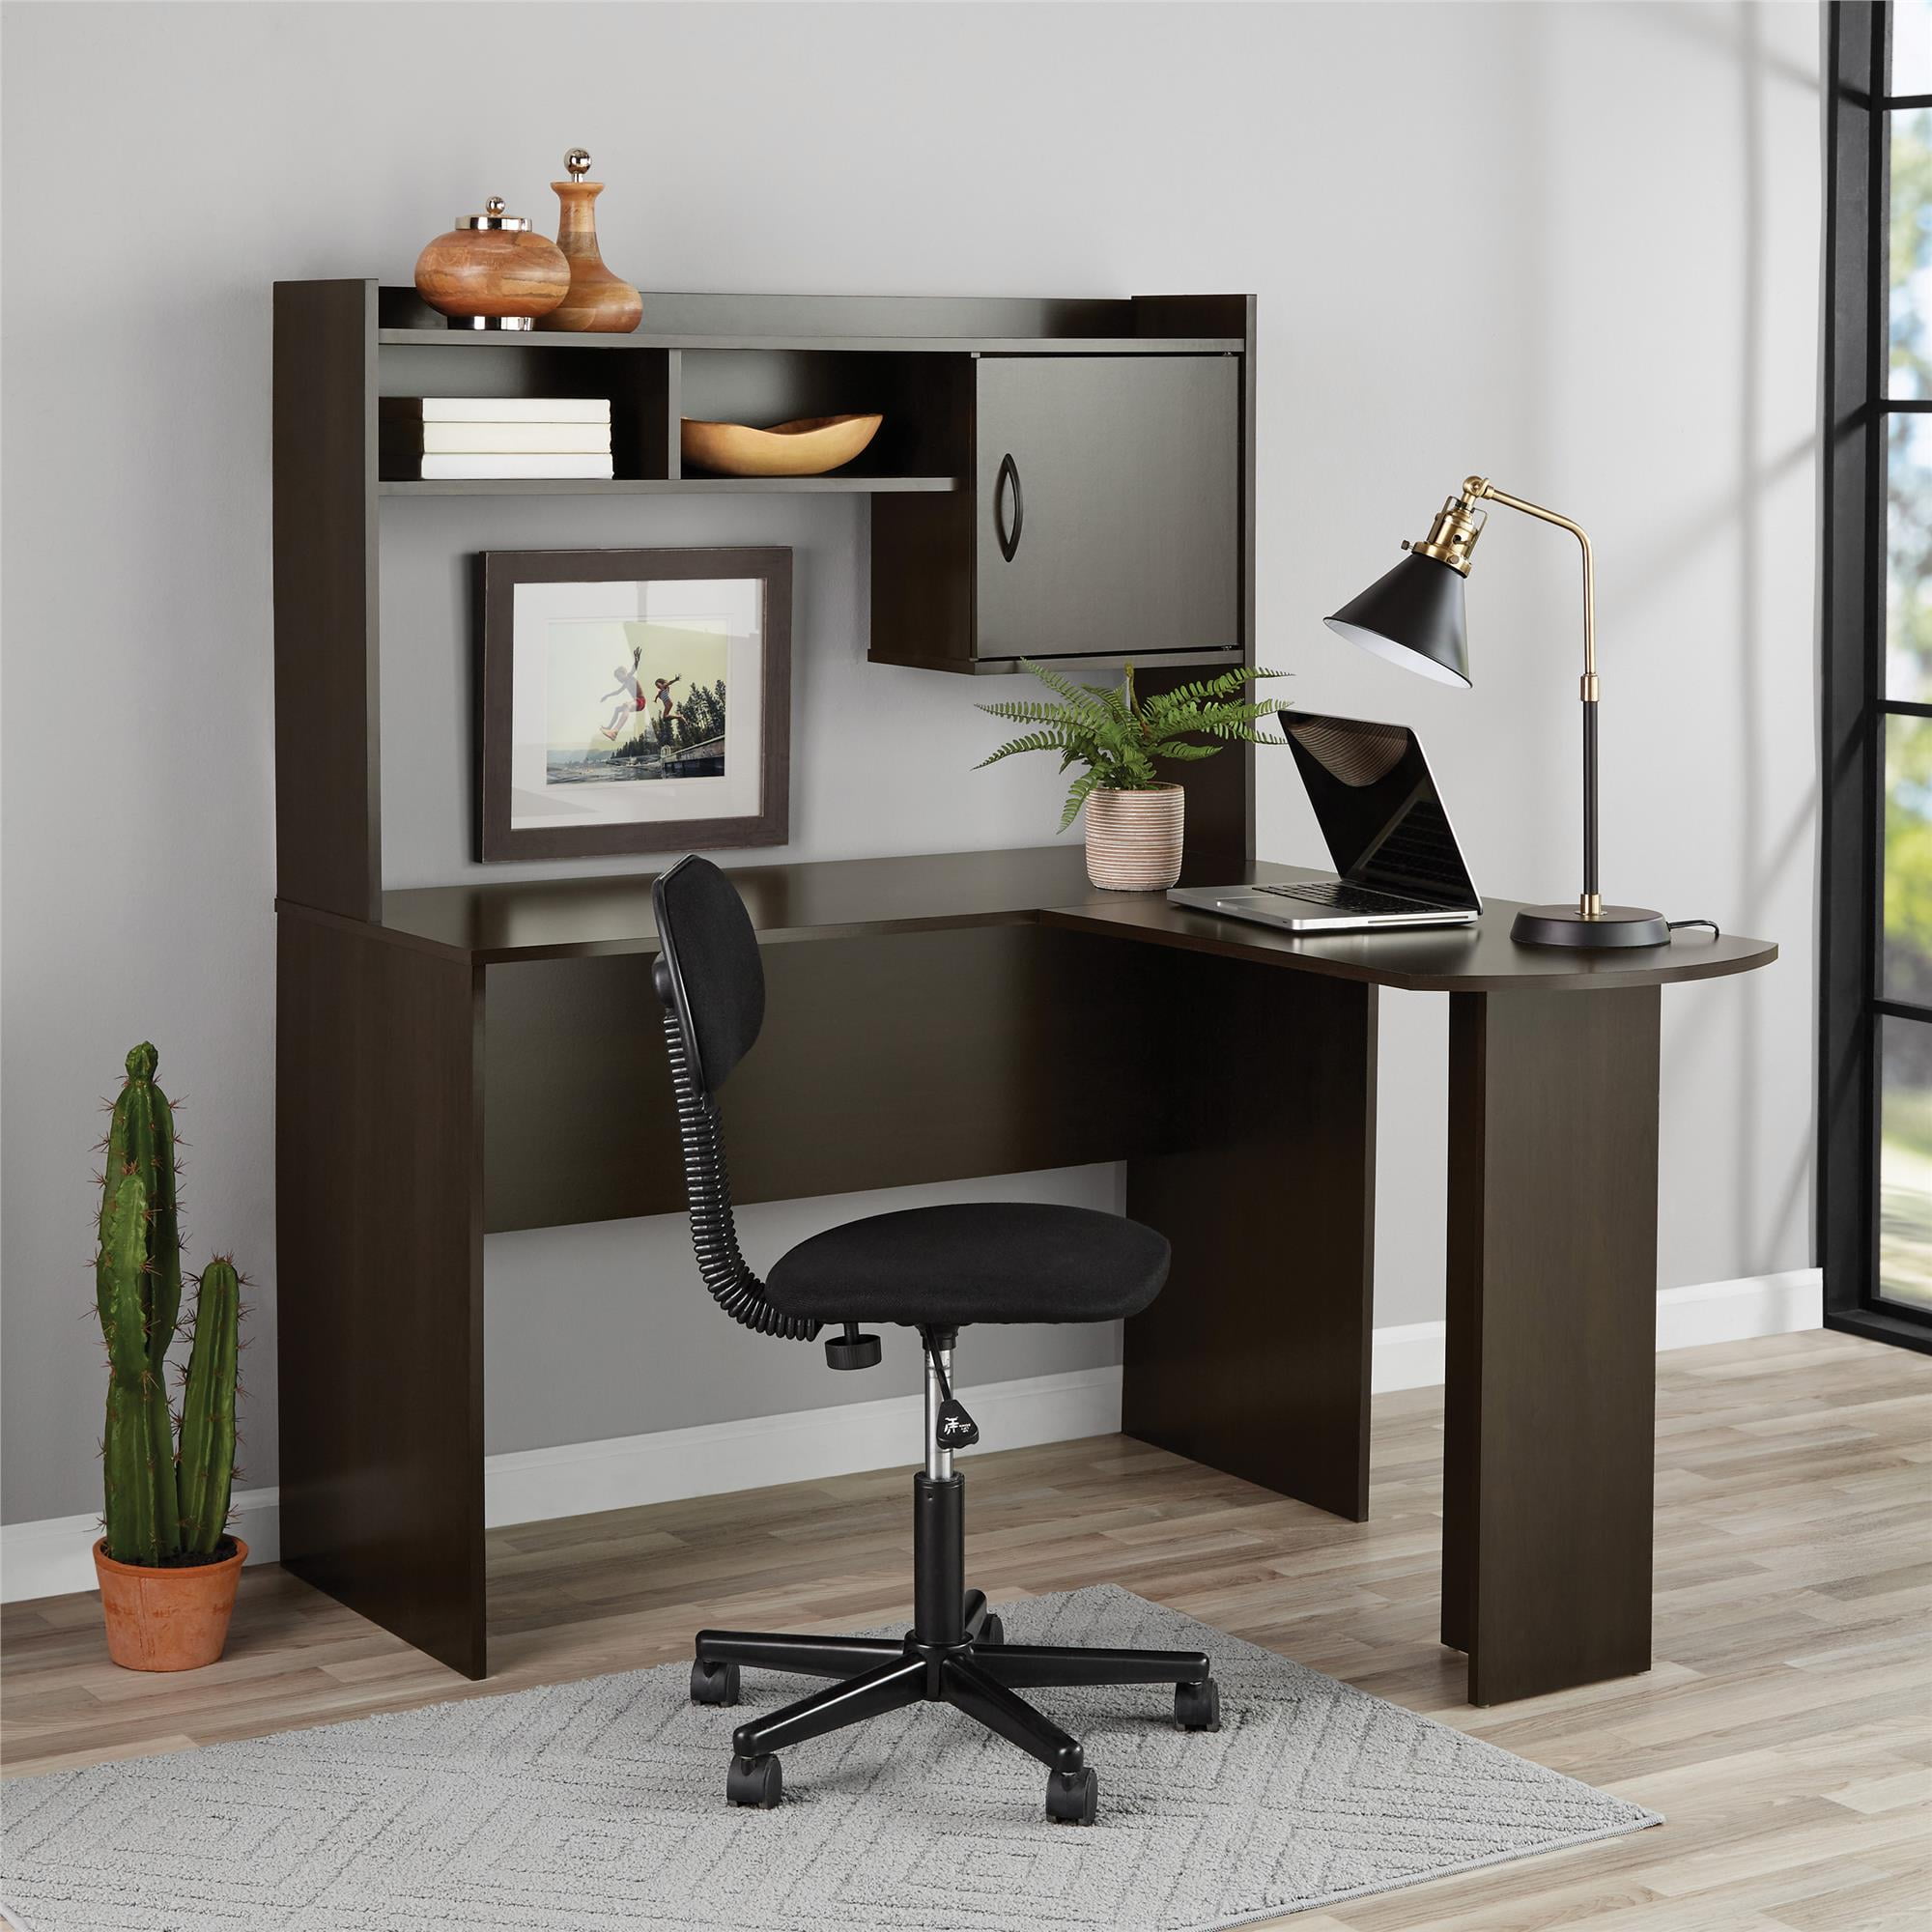 Mainstays L Shaped Desk With Hutch, Contemporary L Shaped Desk With Hutch